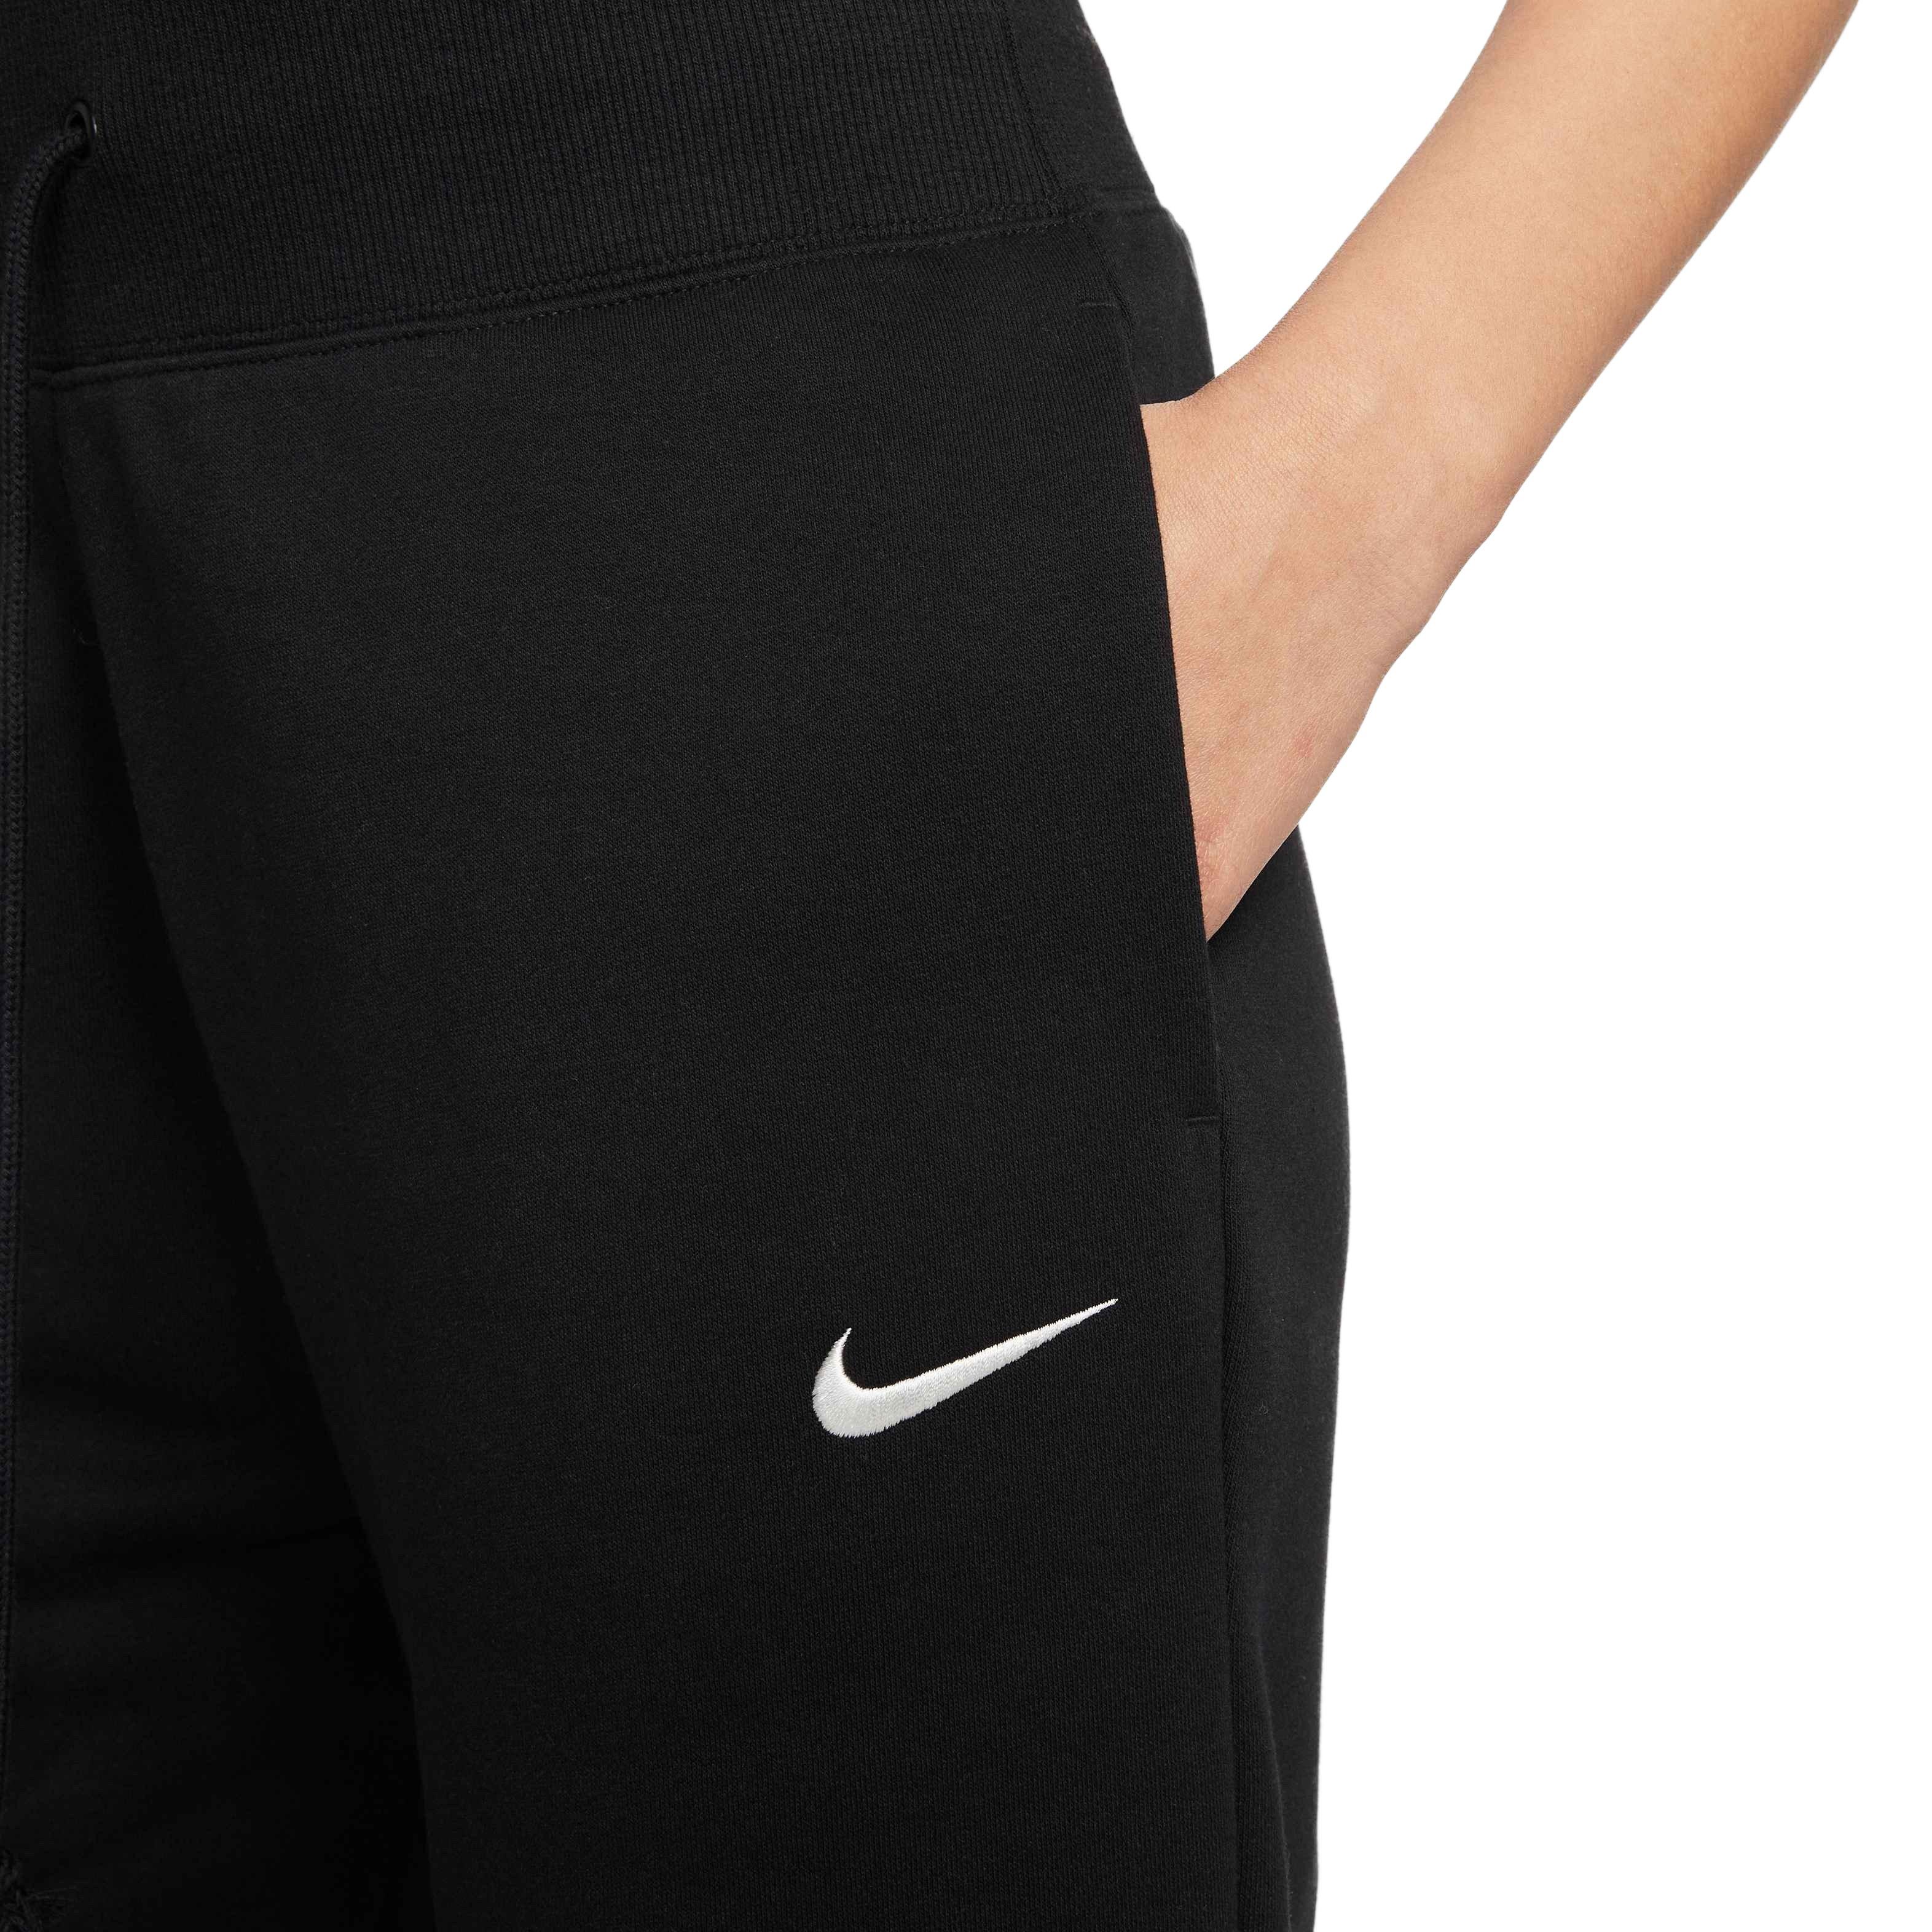 Nike Women Black Slim Fit Solid BLISS VCTRY DRI-FIT Cropped Joggers